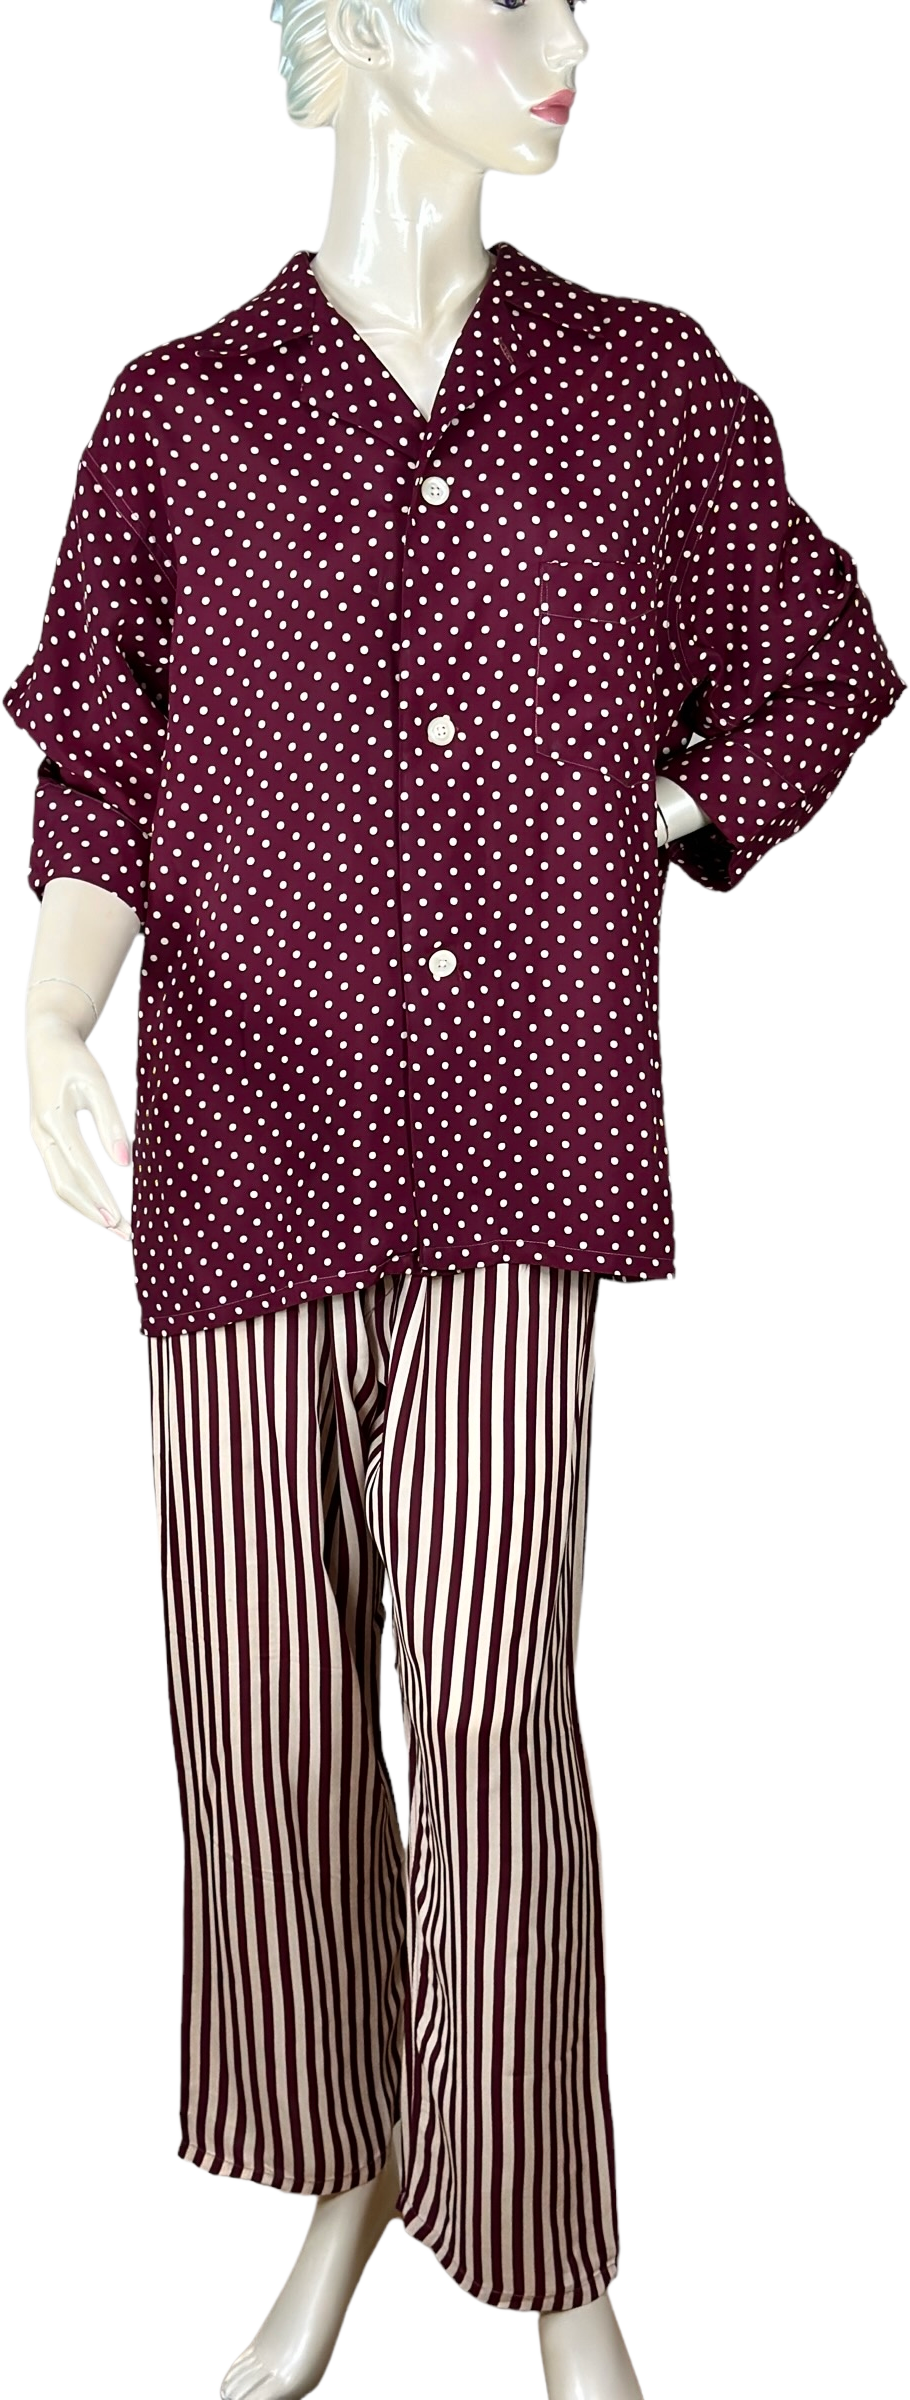 Vintage 30s/40s Cold Rayon Pajamas Polka Dot And Striped By